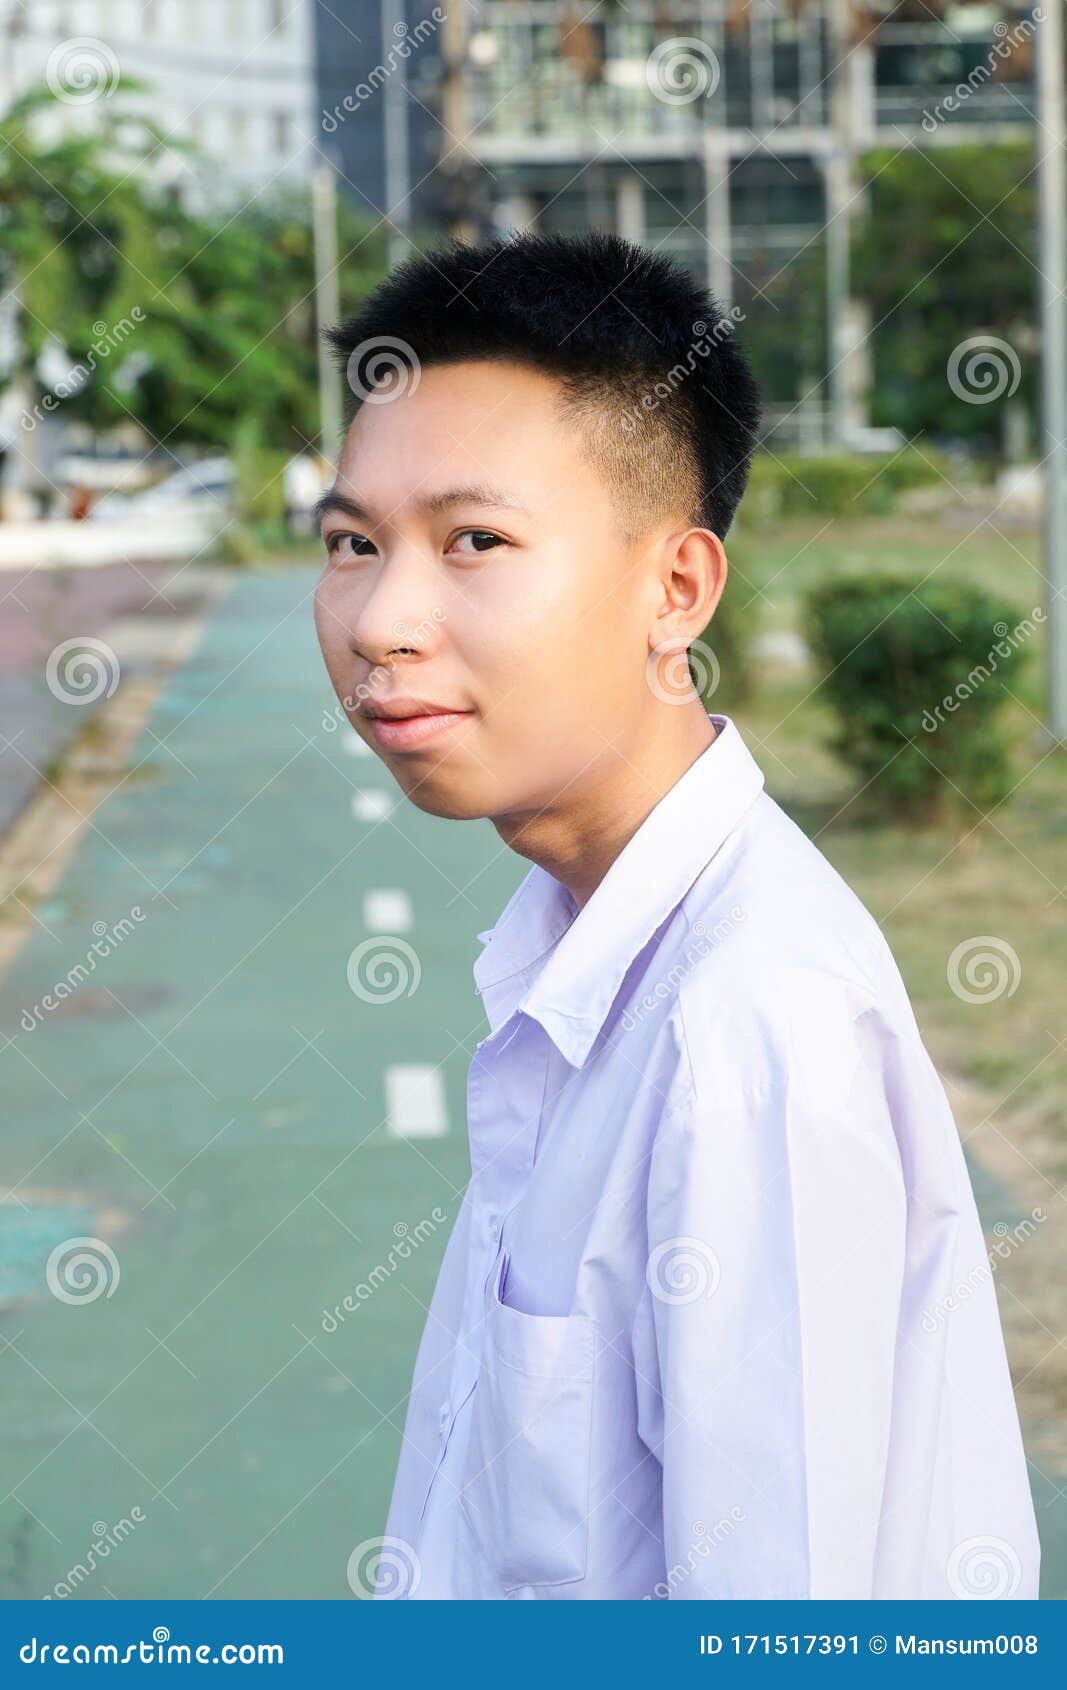 Thai student in uniform stock image. Image of adult - 171517391